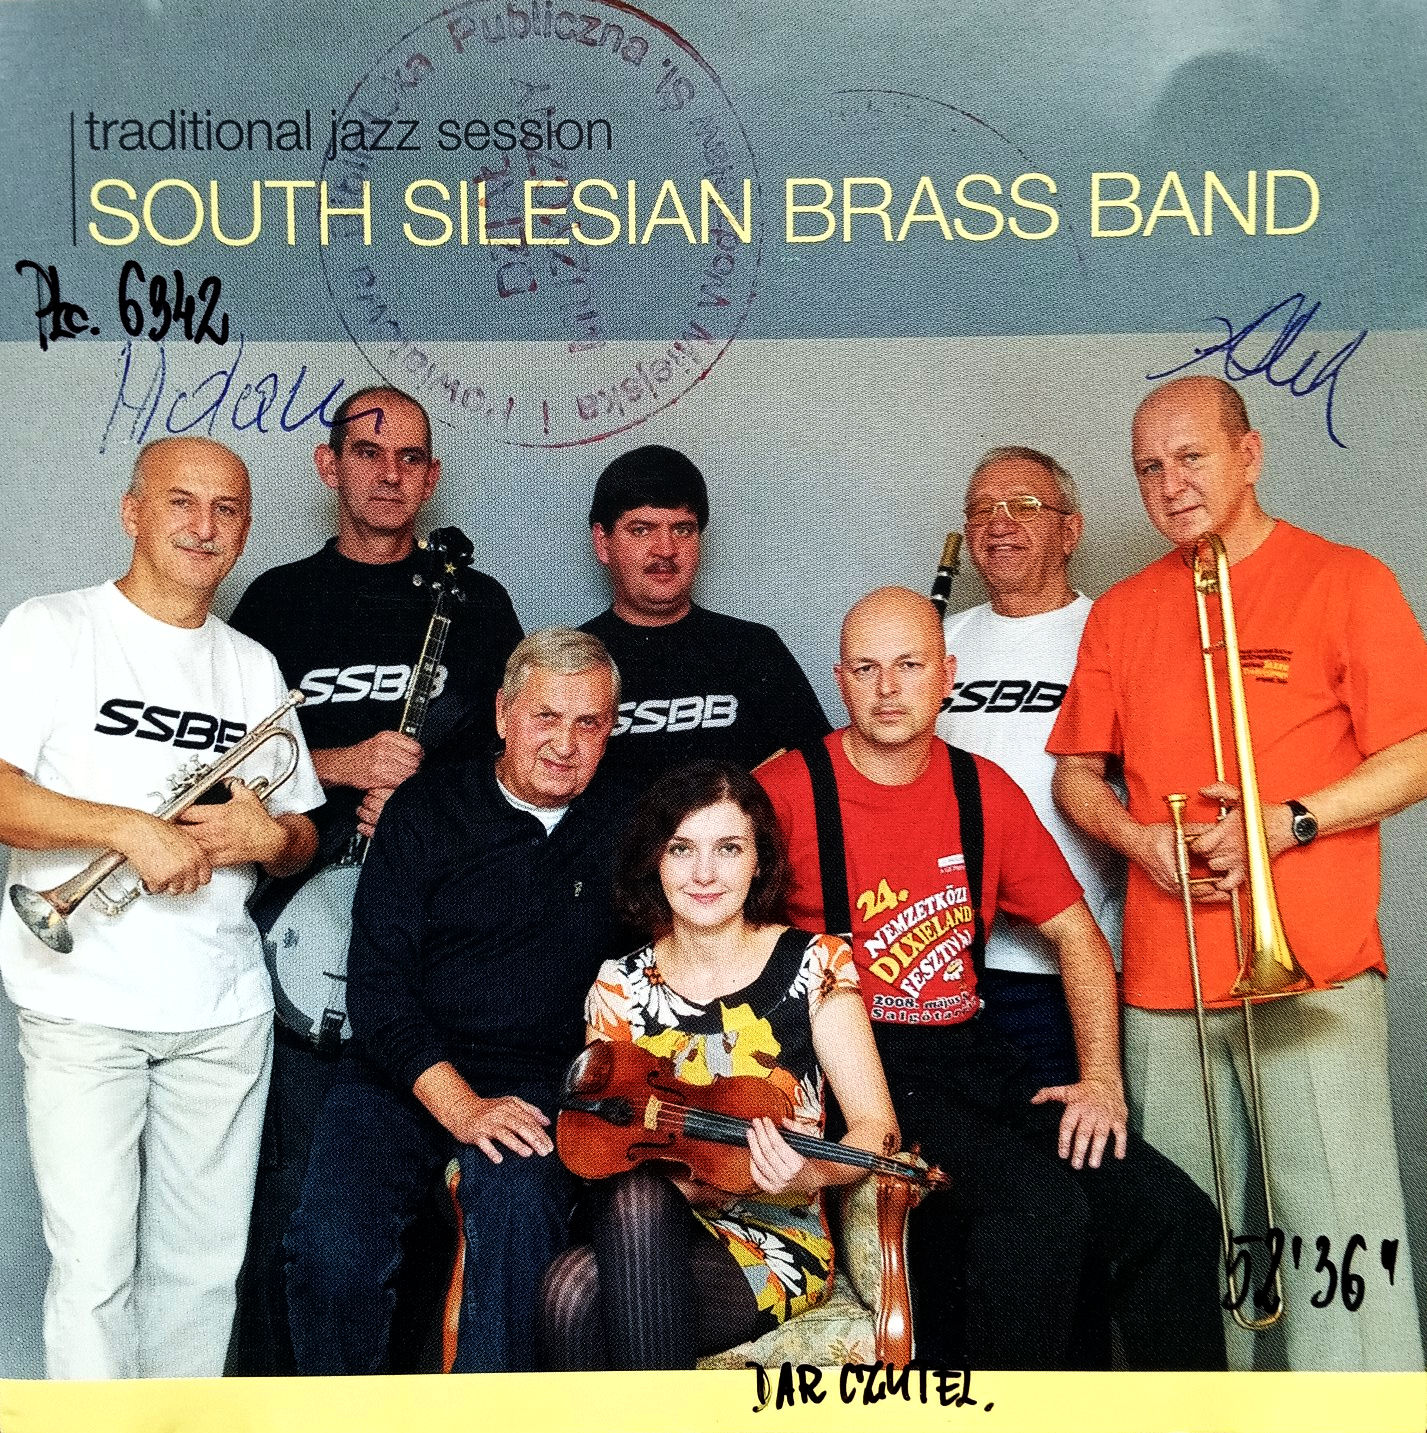 SOUTH SILESIAN BRASS BAND – Traditional Jazz Session